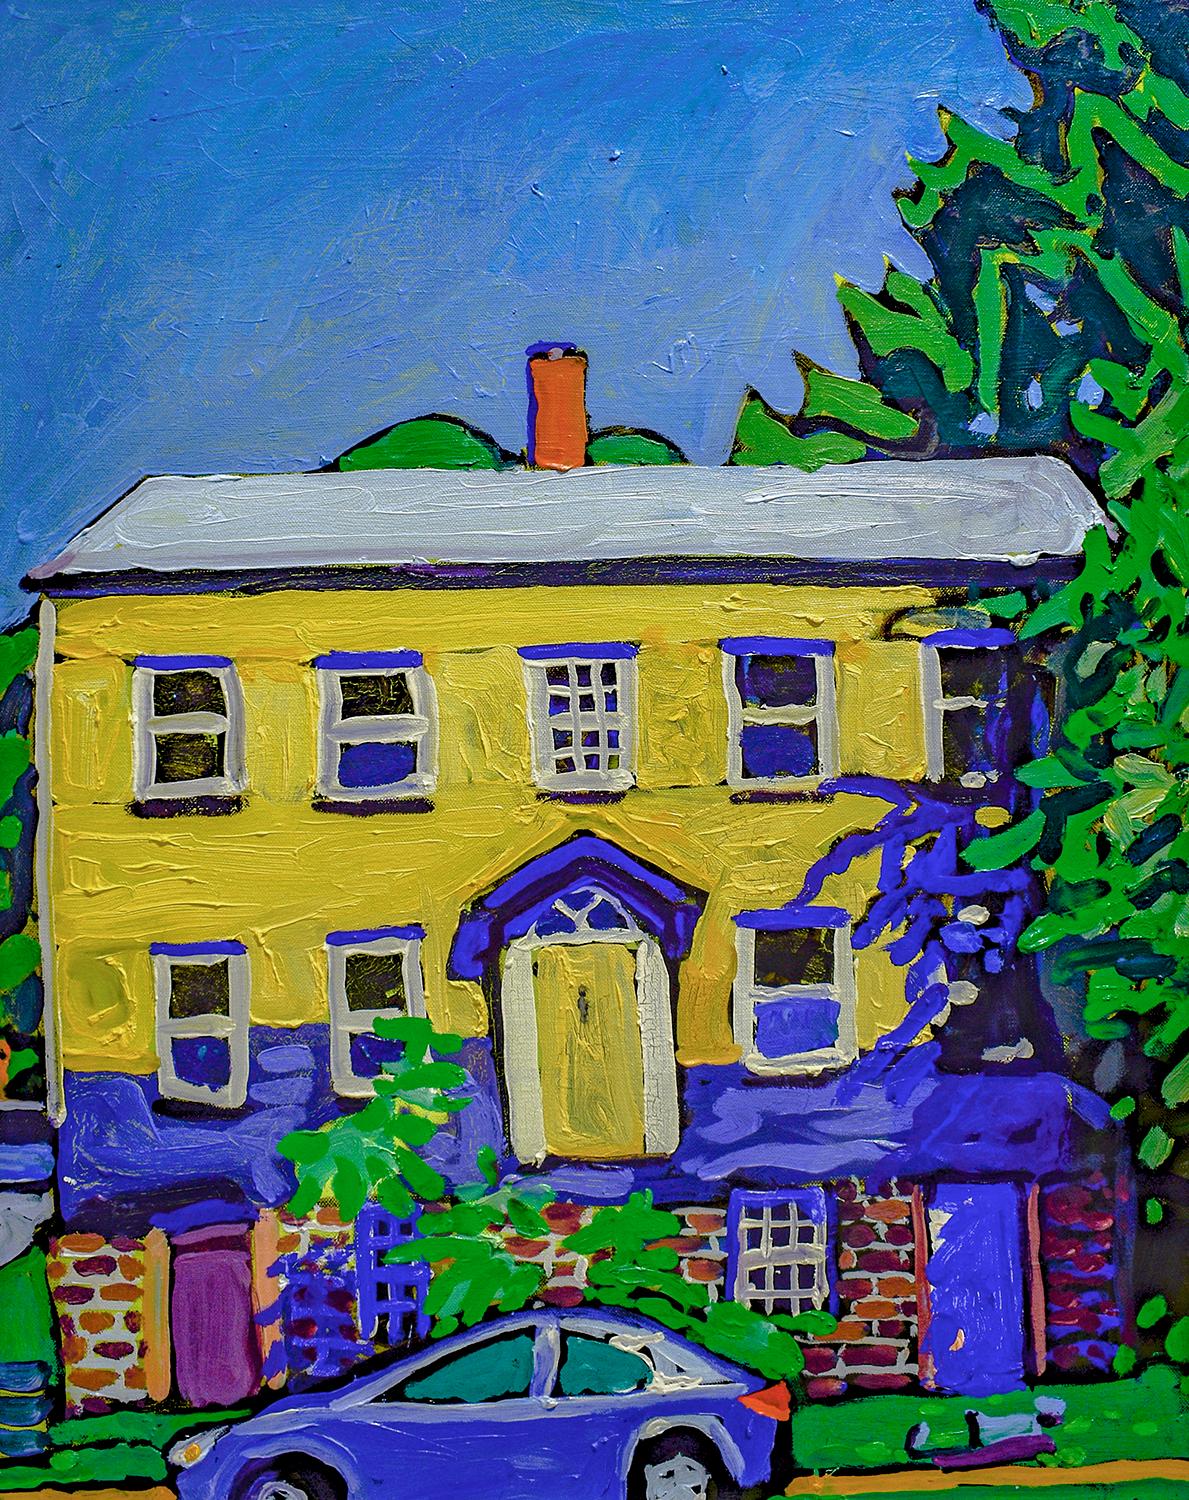 56 Washington, Athens NY (Fauvist Style Oil Painting of Yellow & Blue House)